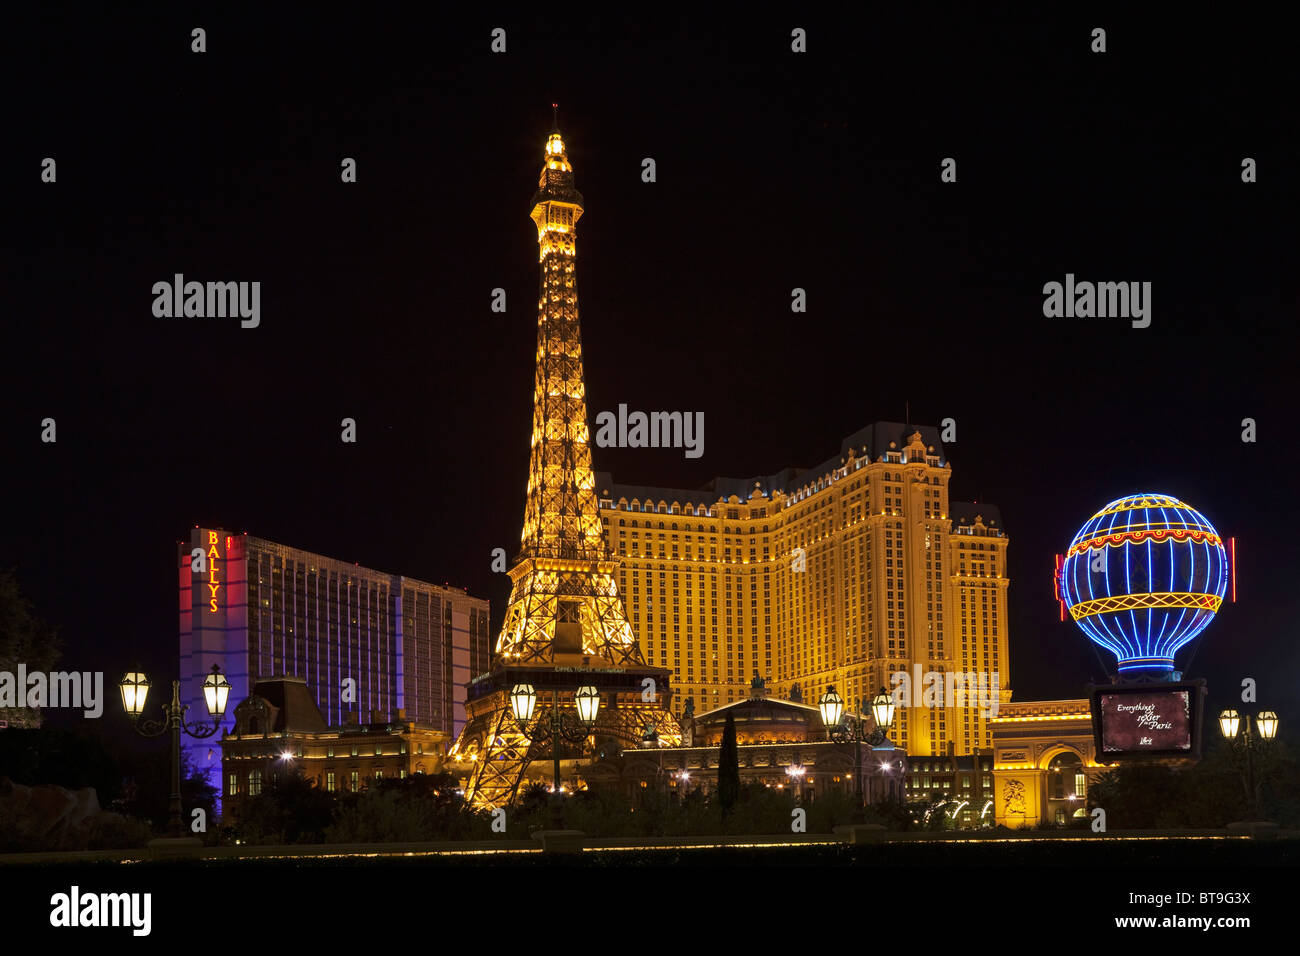 Eiffel Tower Of Paris Hotel In Las Vegas Illuminated At Night In Las Vegas,  Nevada Stock Photo, Picture and Royalty Free Image. Image 65907822.